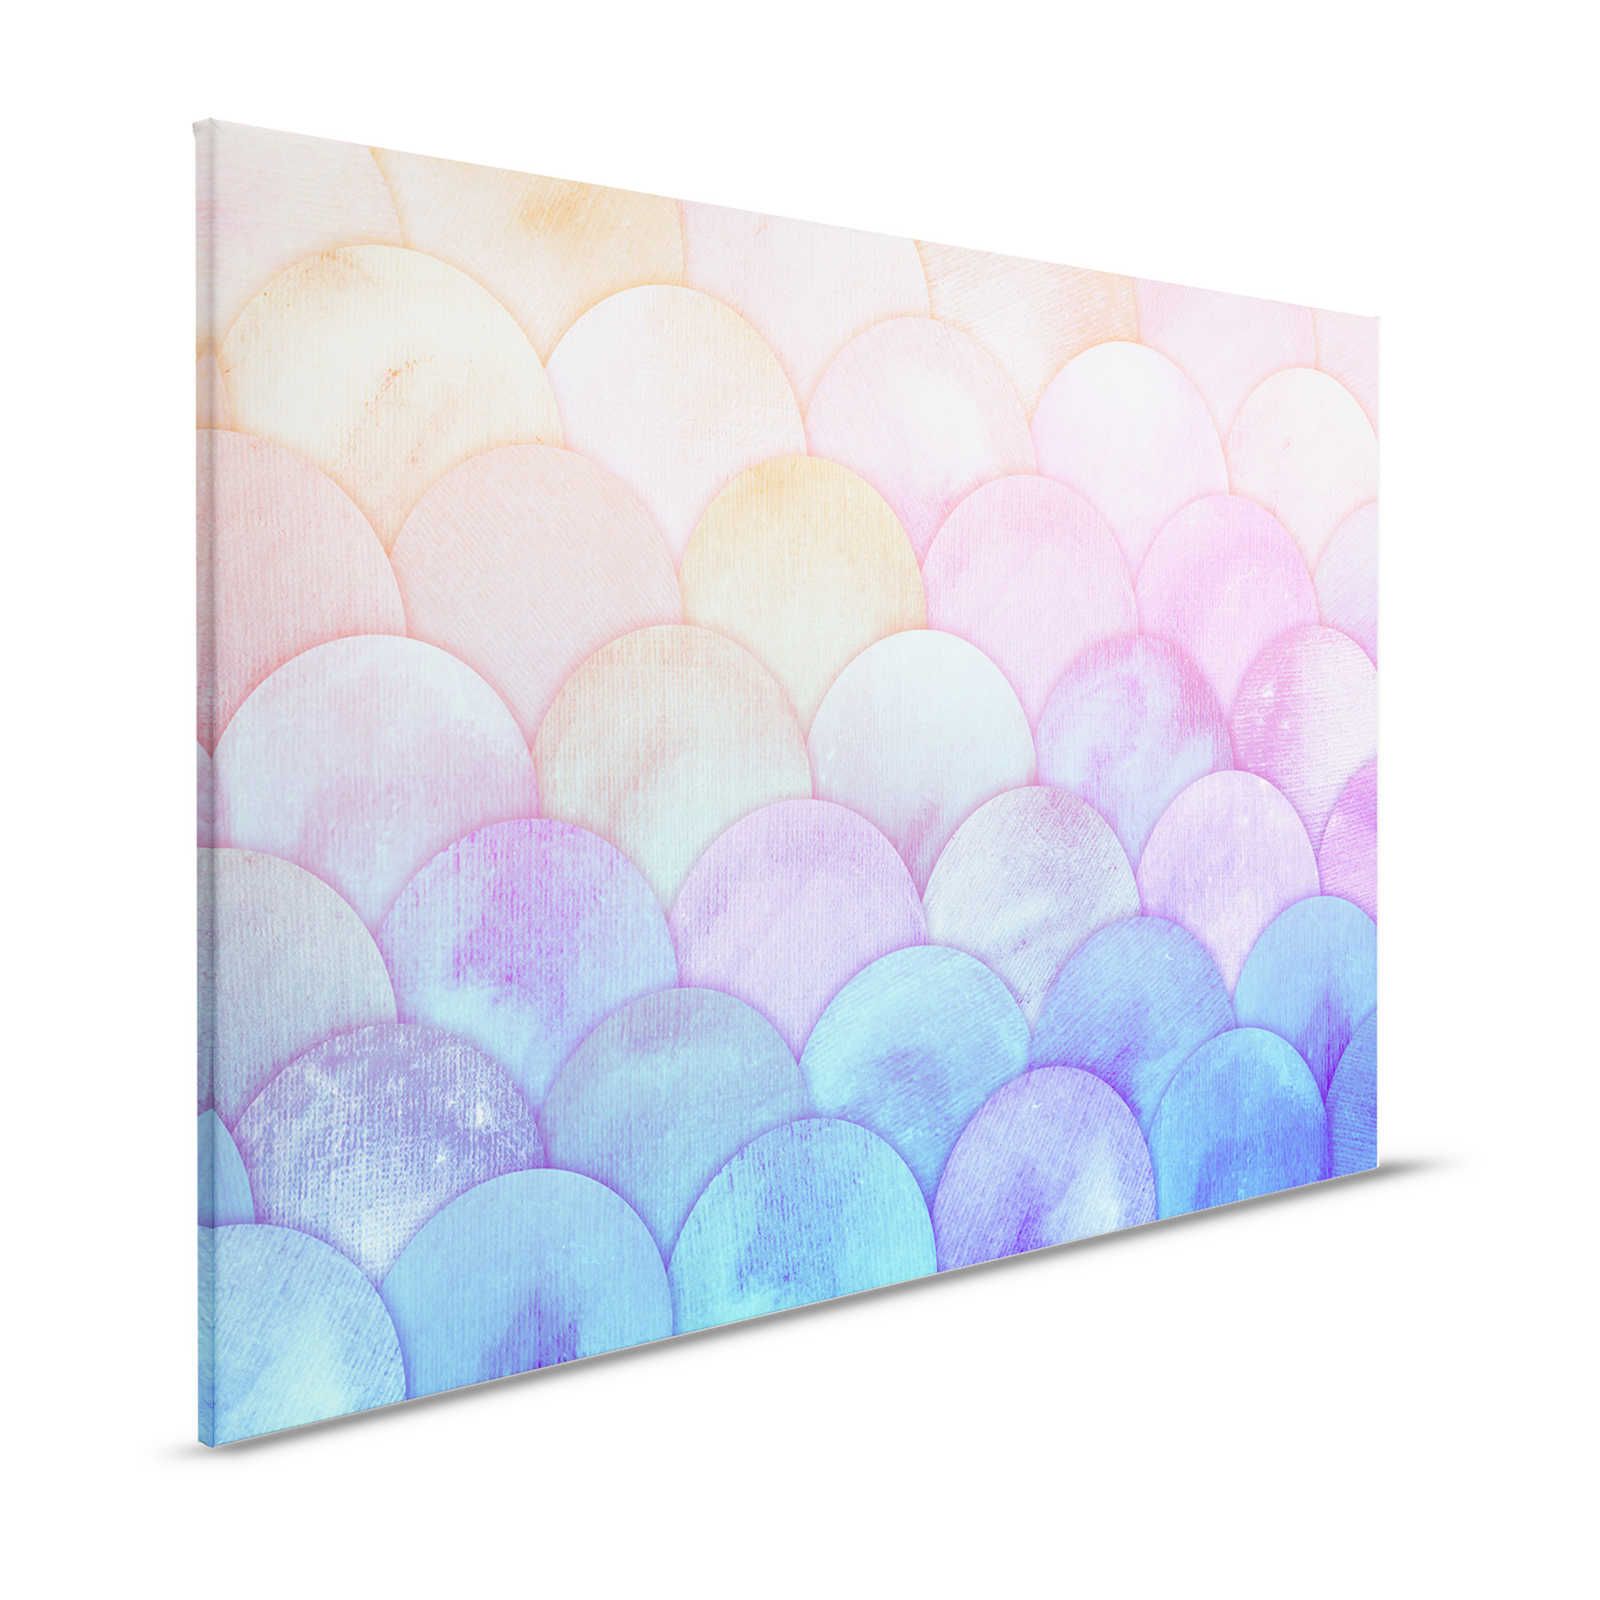 Canvas with fish scale pattern - 120 cm x 80 cm
